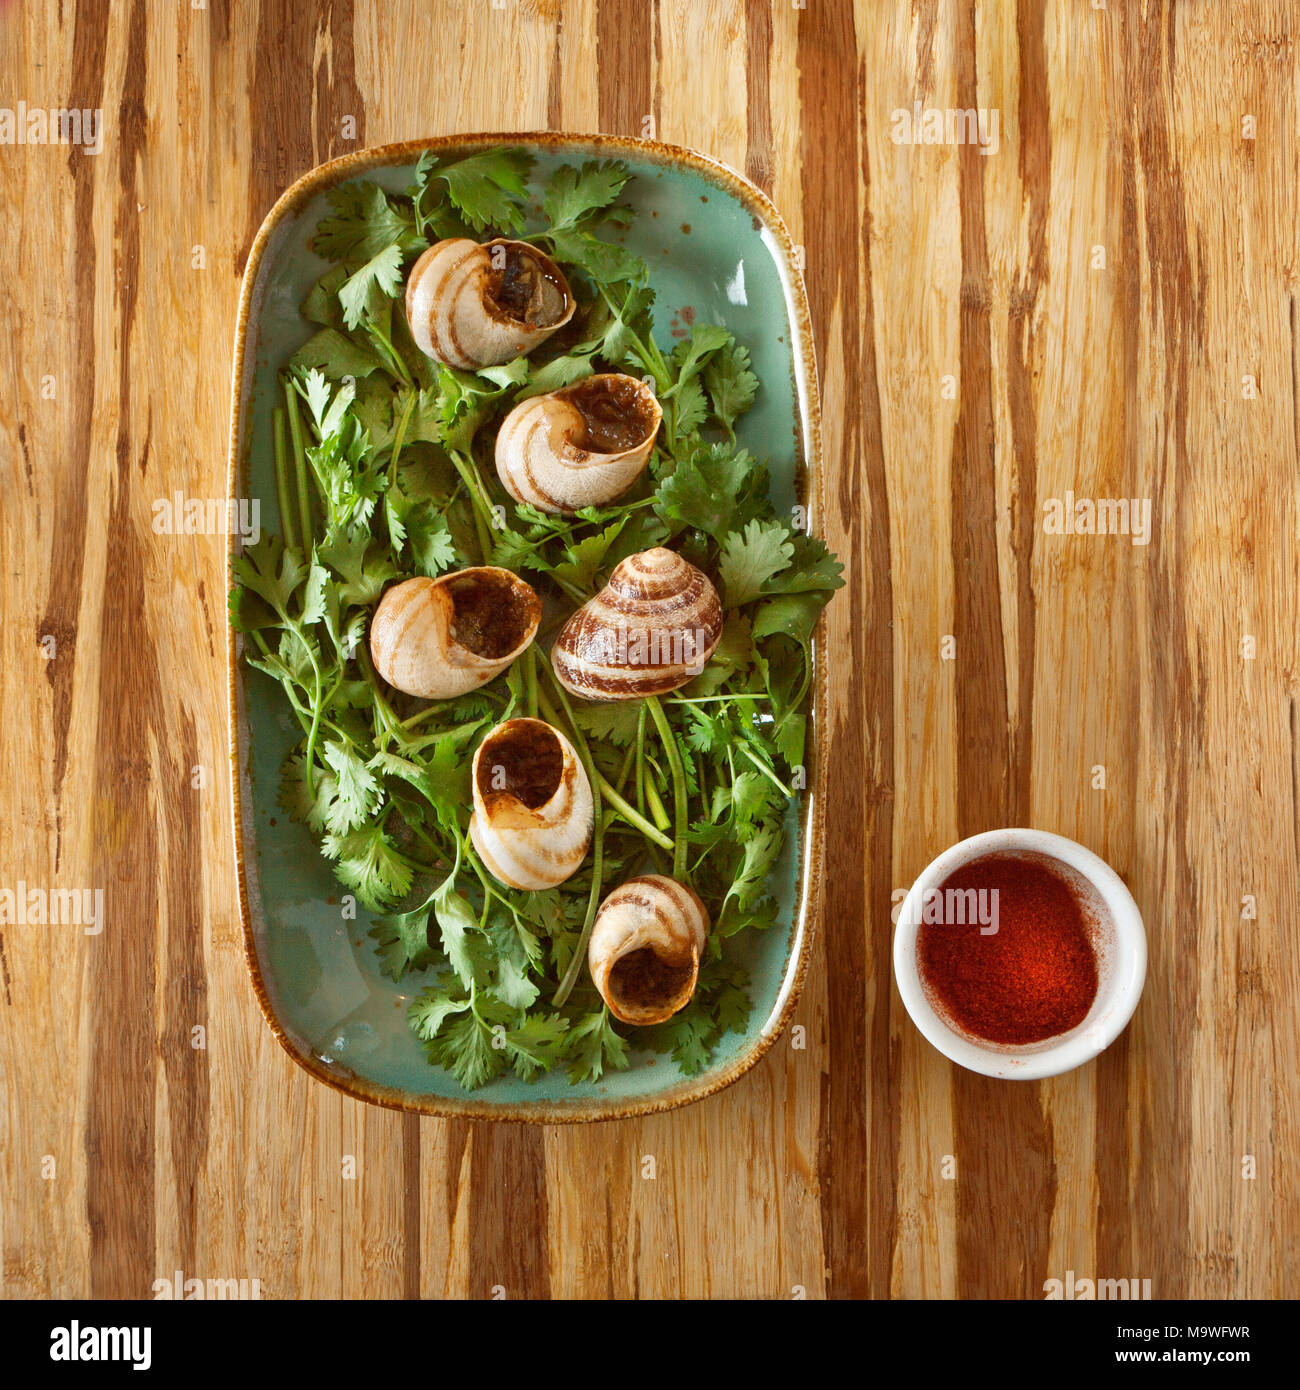 french food, cooked stuffed snails dish decorated with coriander on a plate, on a wooden table and copy space for text Stock Photo